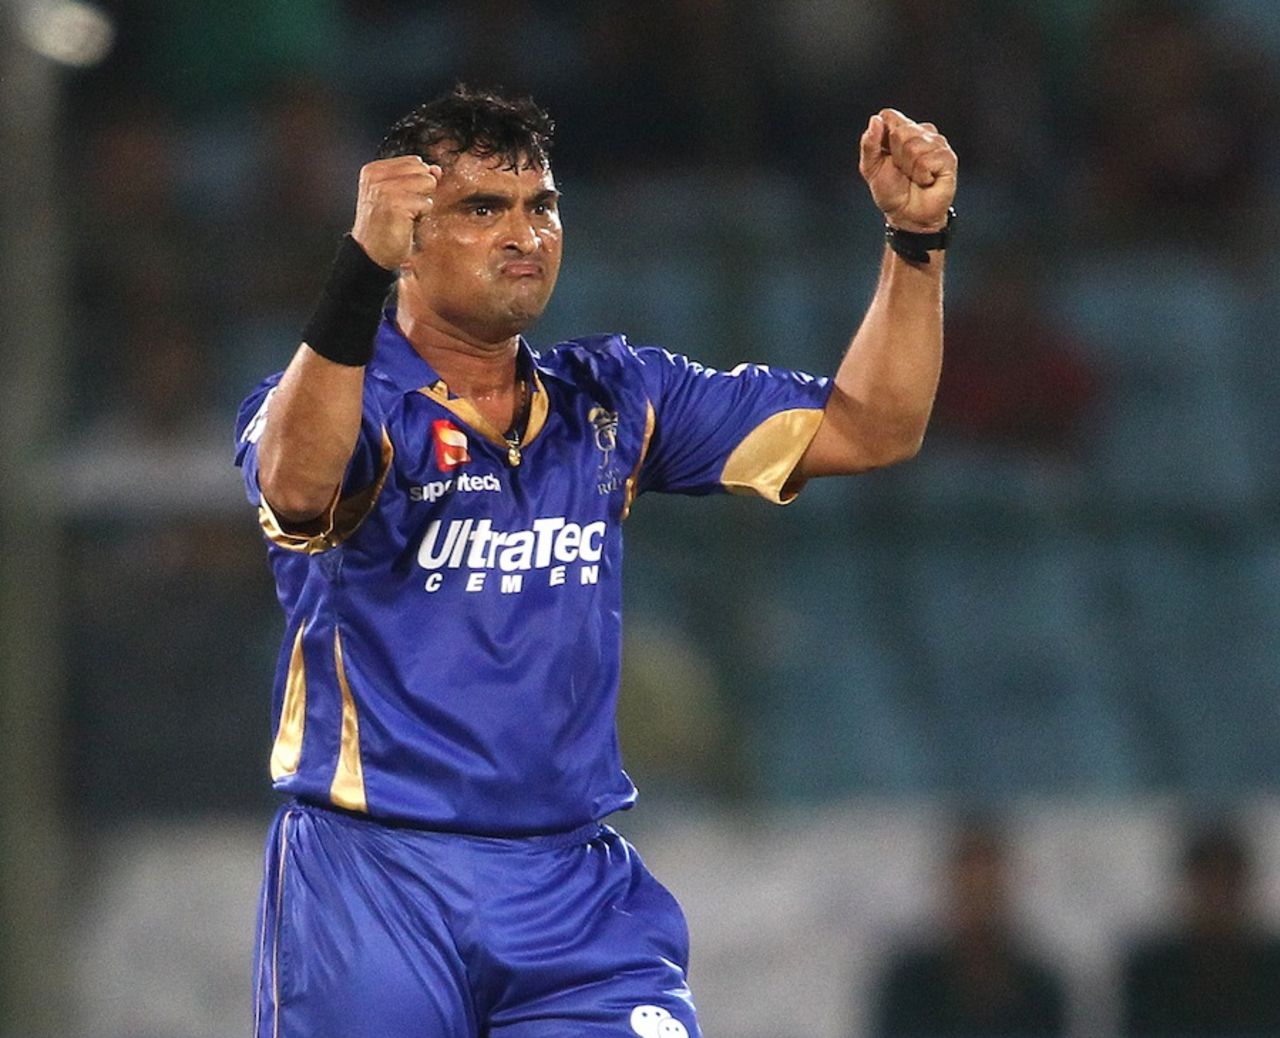 Pravin Tambe took two wickets for 17 runs, Perth Scorchers v Rajasthan Royals, Group A, Champions League 2013, Jaipur, September 29, 2013